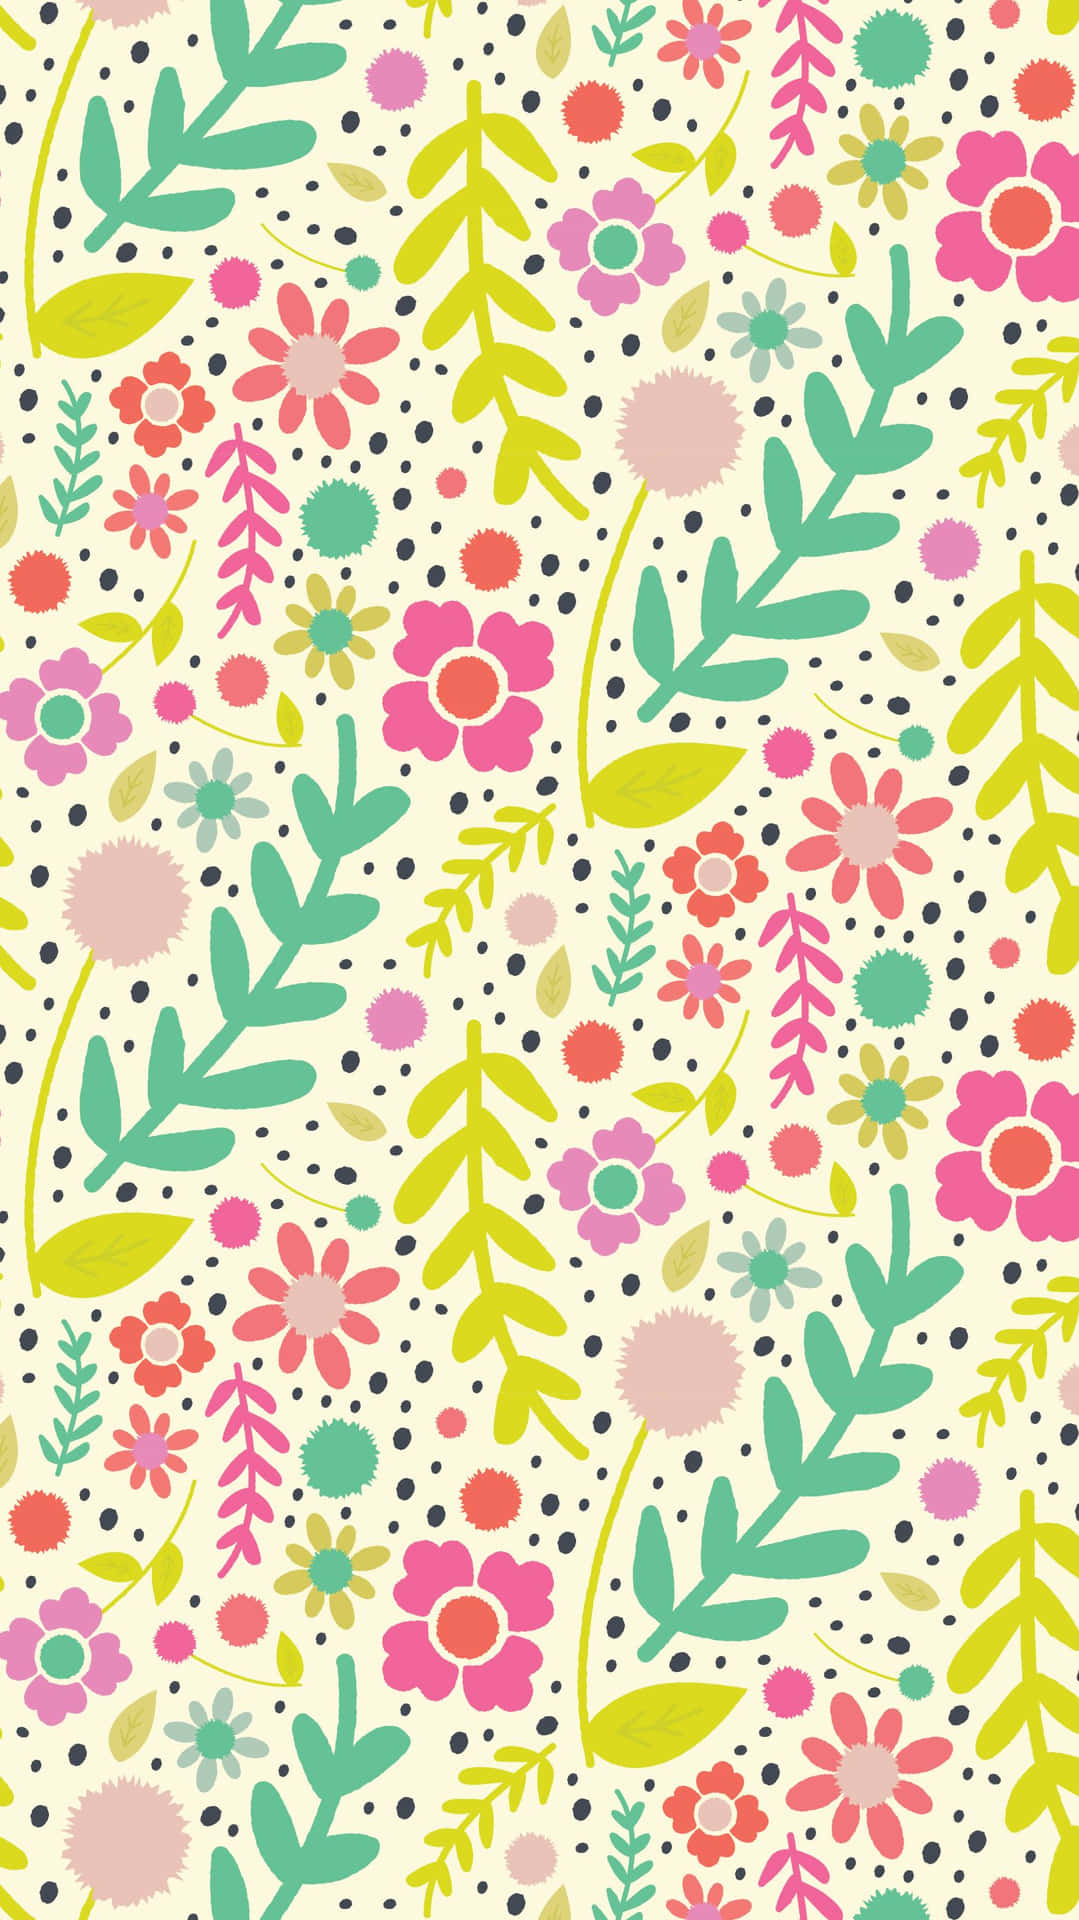 A Floral Pattern With Pink, Green And Yellow Flowers